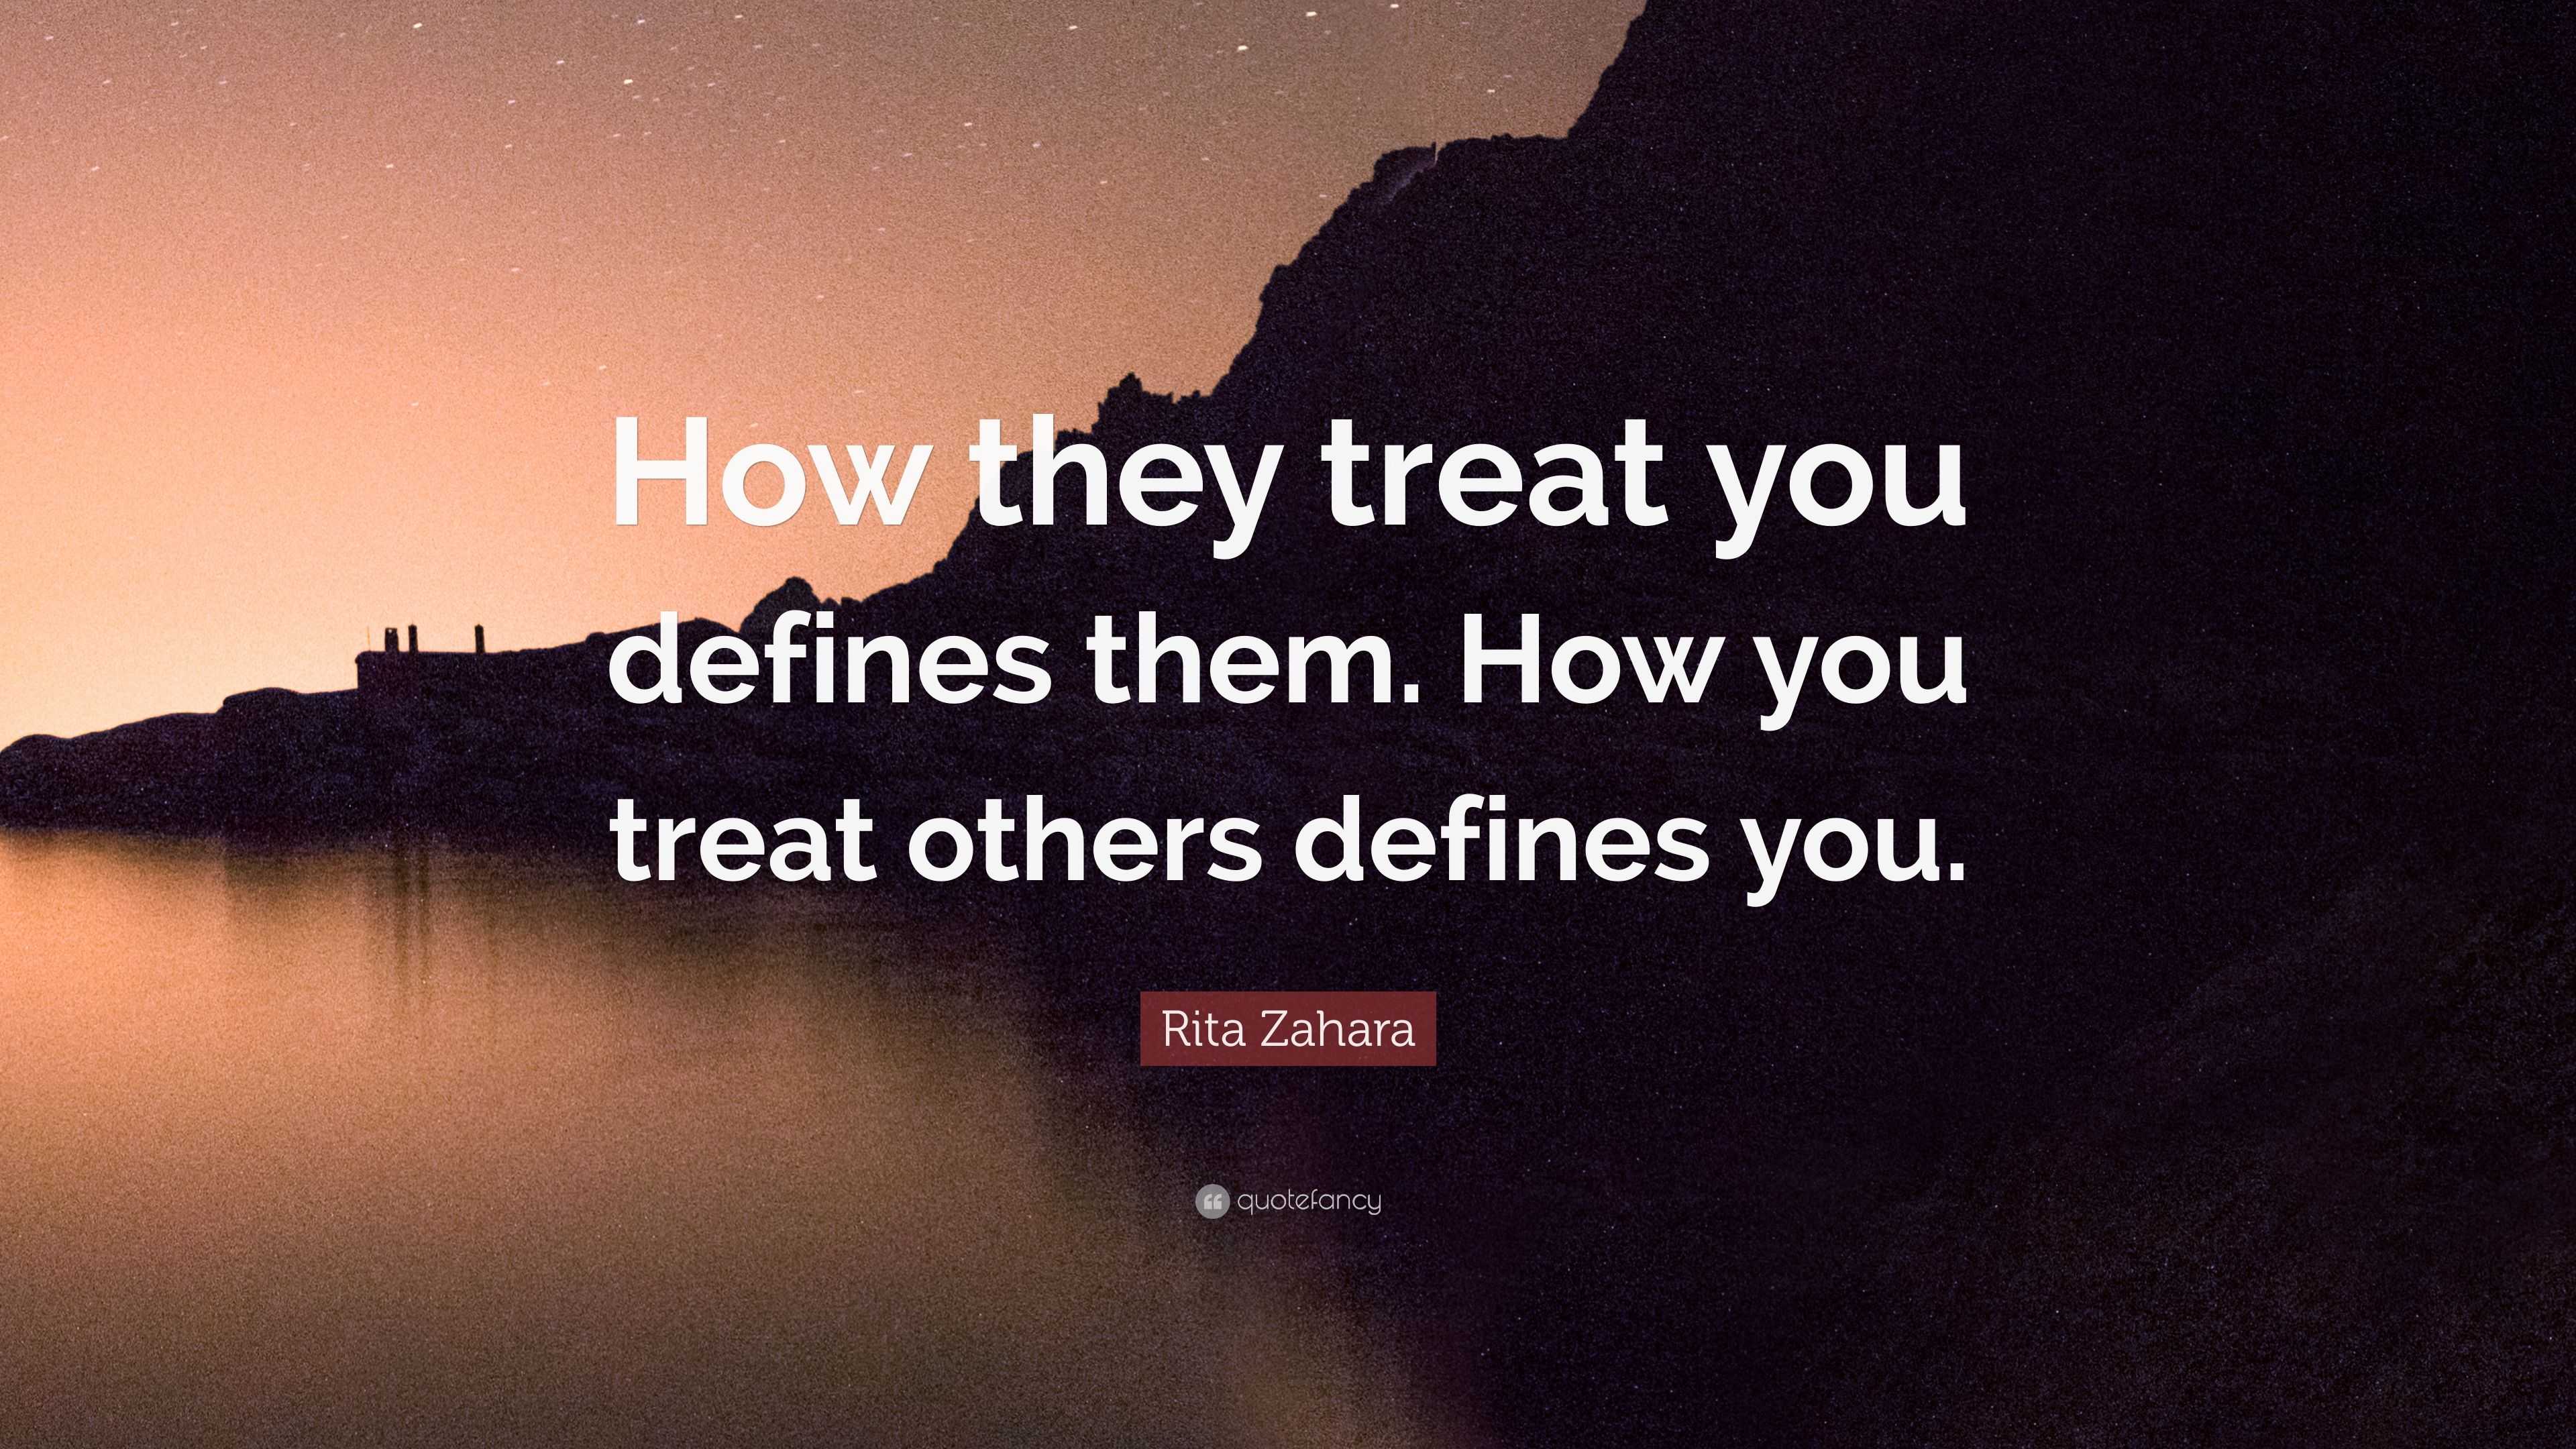 Rita Zahara Quote: “How they treat you defines them. How you treat